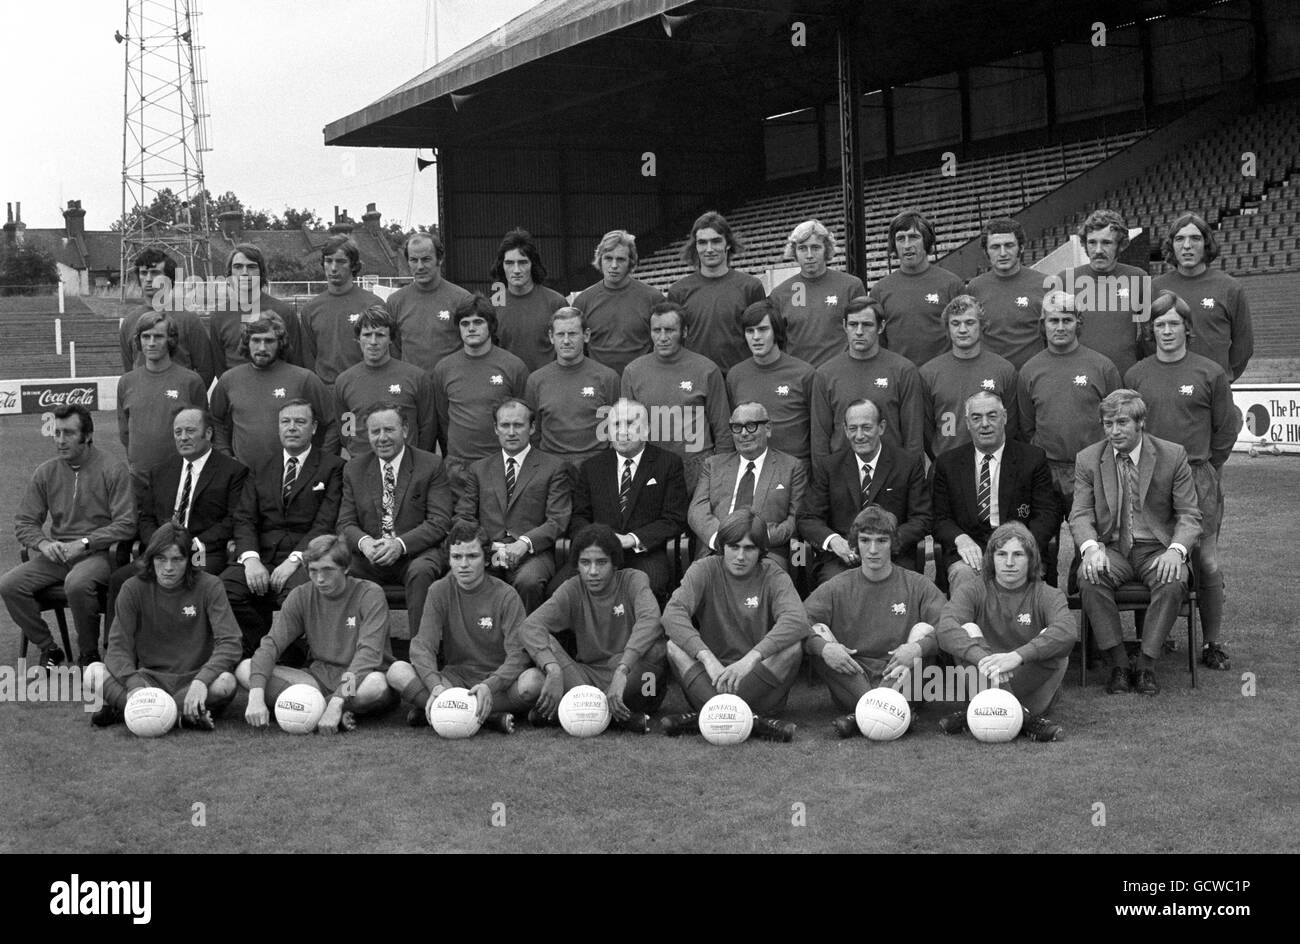 Leyton Orient FC, back row, left to right; Micky Bullock, Bobby Moss, John South, Terry Mancini, Mike O'Shaughnessy, Ray Goddard, Steve Bowtell, Paul Harris, Gordon Riddick, Bobby Arber, Ian Bowyer, and Malcolm Filby. Second row, left to right; Peter Allen, Barry Fairbrother, Barry Dyson, Martin Binks, John Sewell, Mark Lazarus, Len Tomkins, Micky Jones, Dennis Rofe, Terry Parmenter and Terry Brisley. Third row, left tor right; Peter Angell (trainer-coach), Len Cheesewright (youth manager), Reg Briggs (director), Frank Harris (director), George Petchey (manager), Arthur Page (chairman), Harry Stock Photo